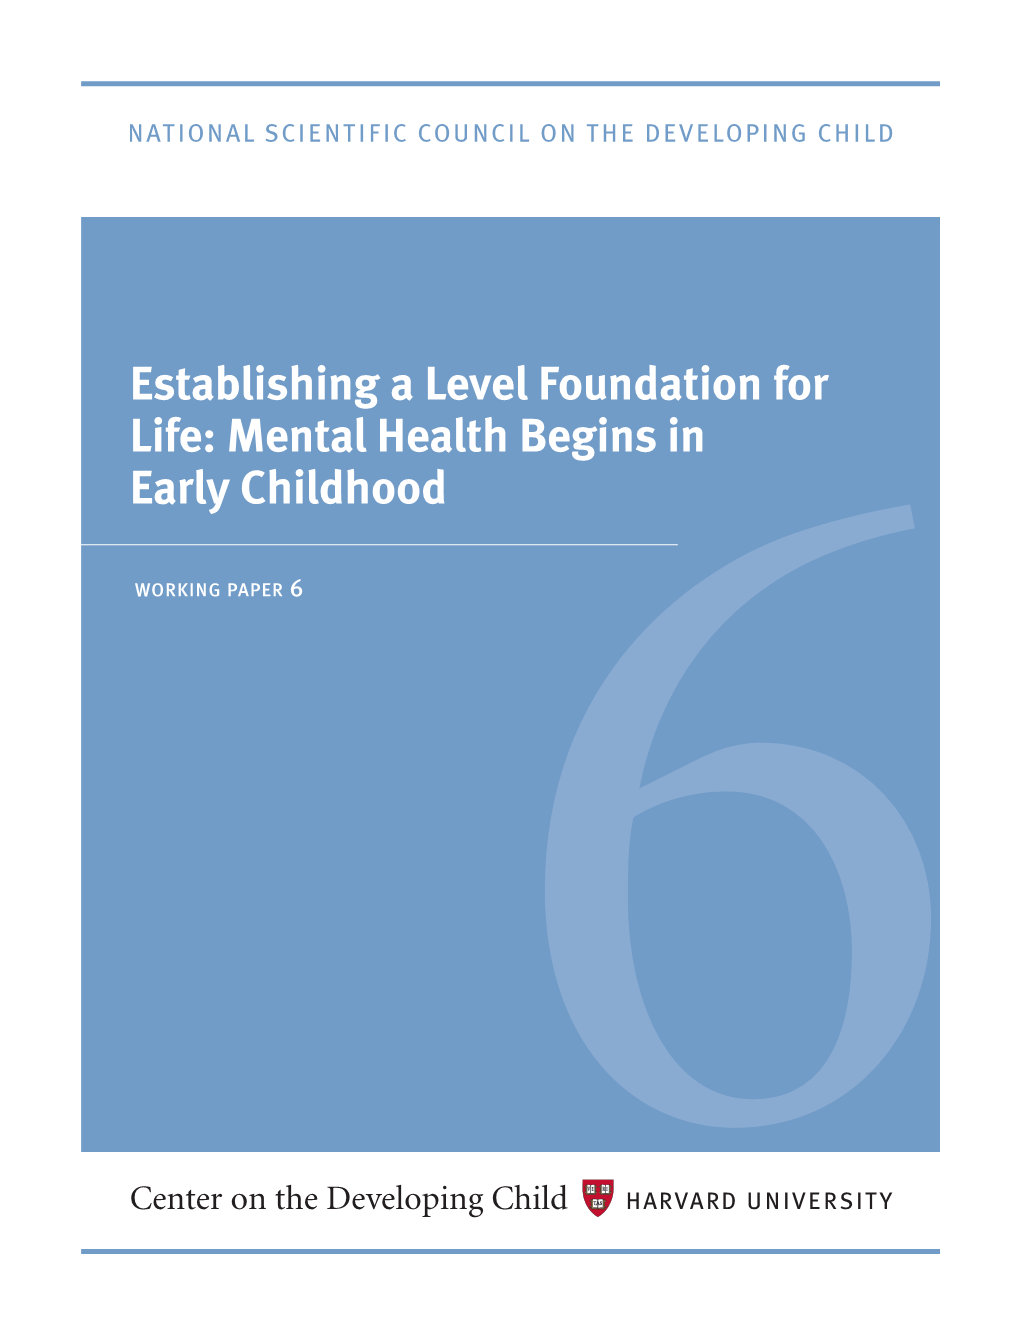 Establishing a Level Foundation for Life: Mental Health Begins in Early Childhood WORKING PAPER 6 6 MEMBERS